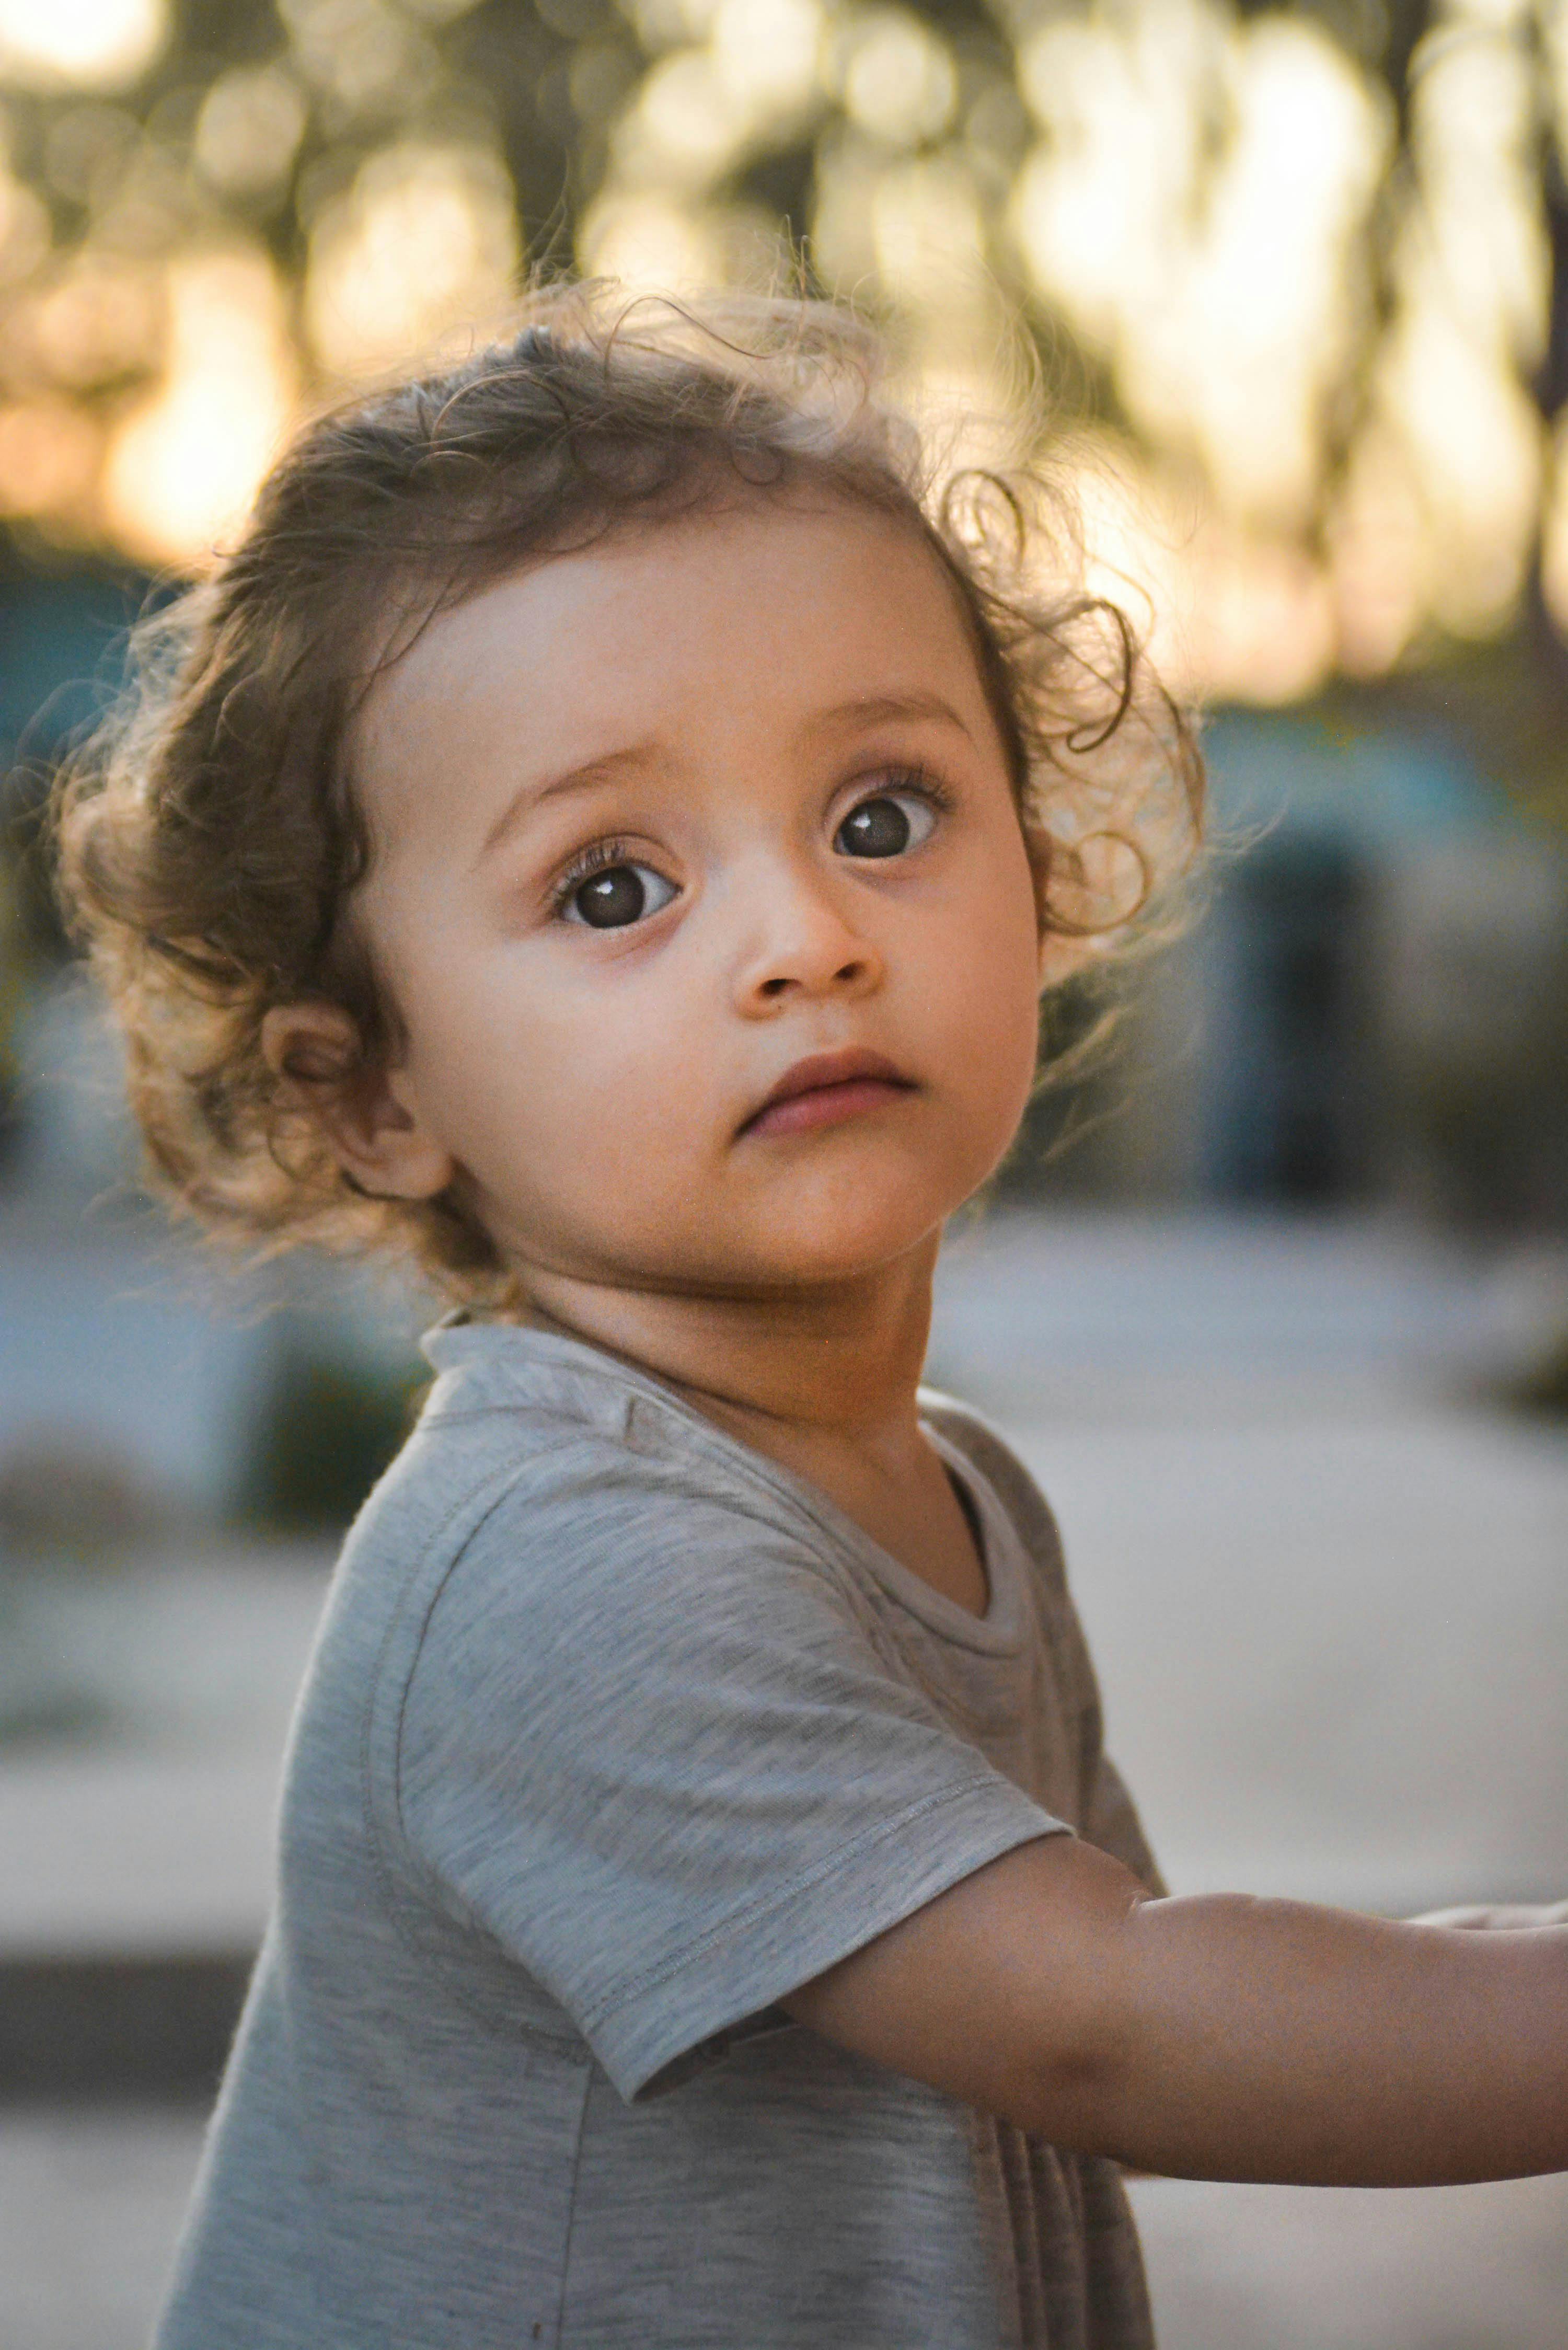 A little girl with curly hair | Source: Pexels